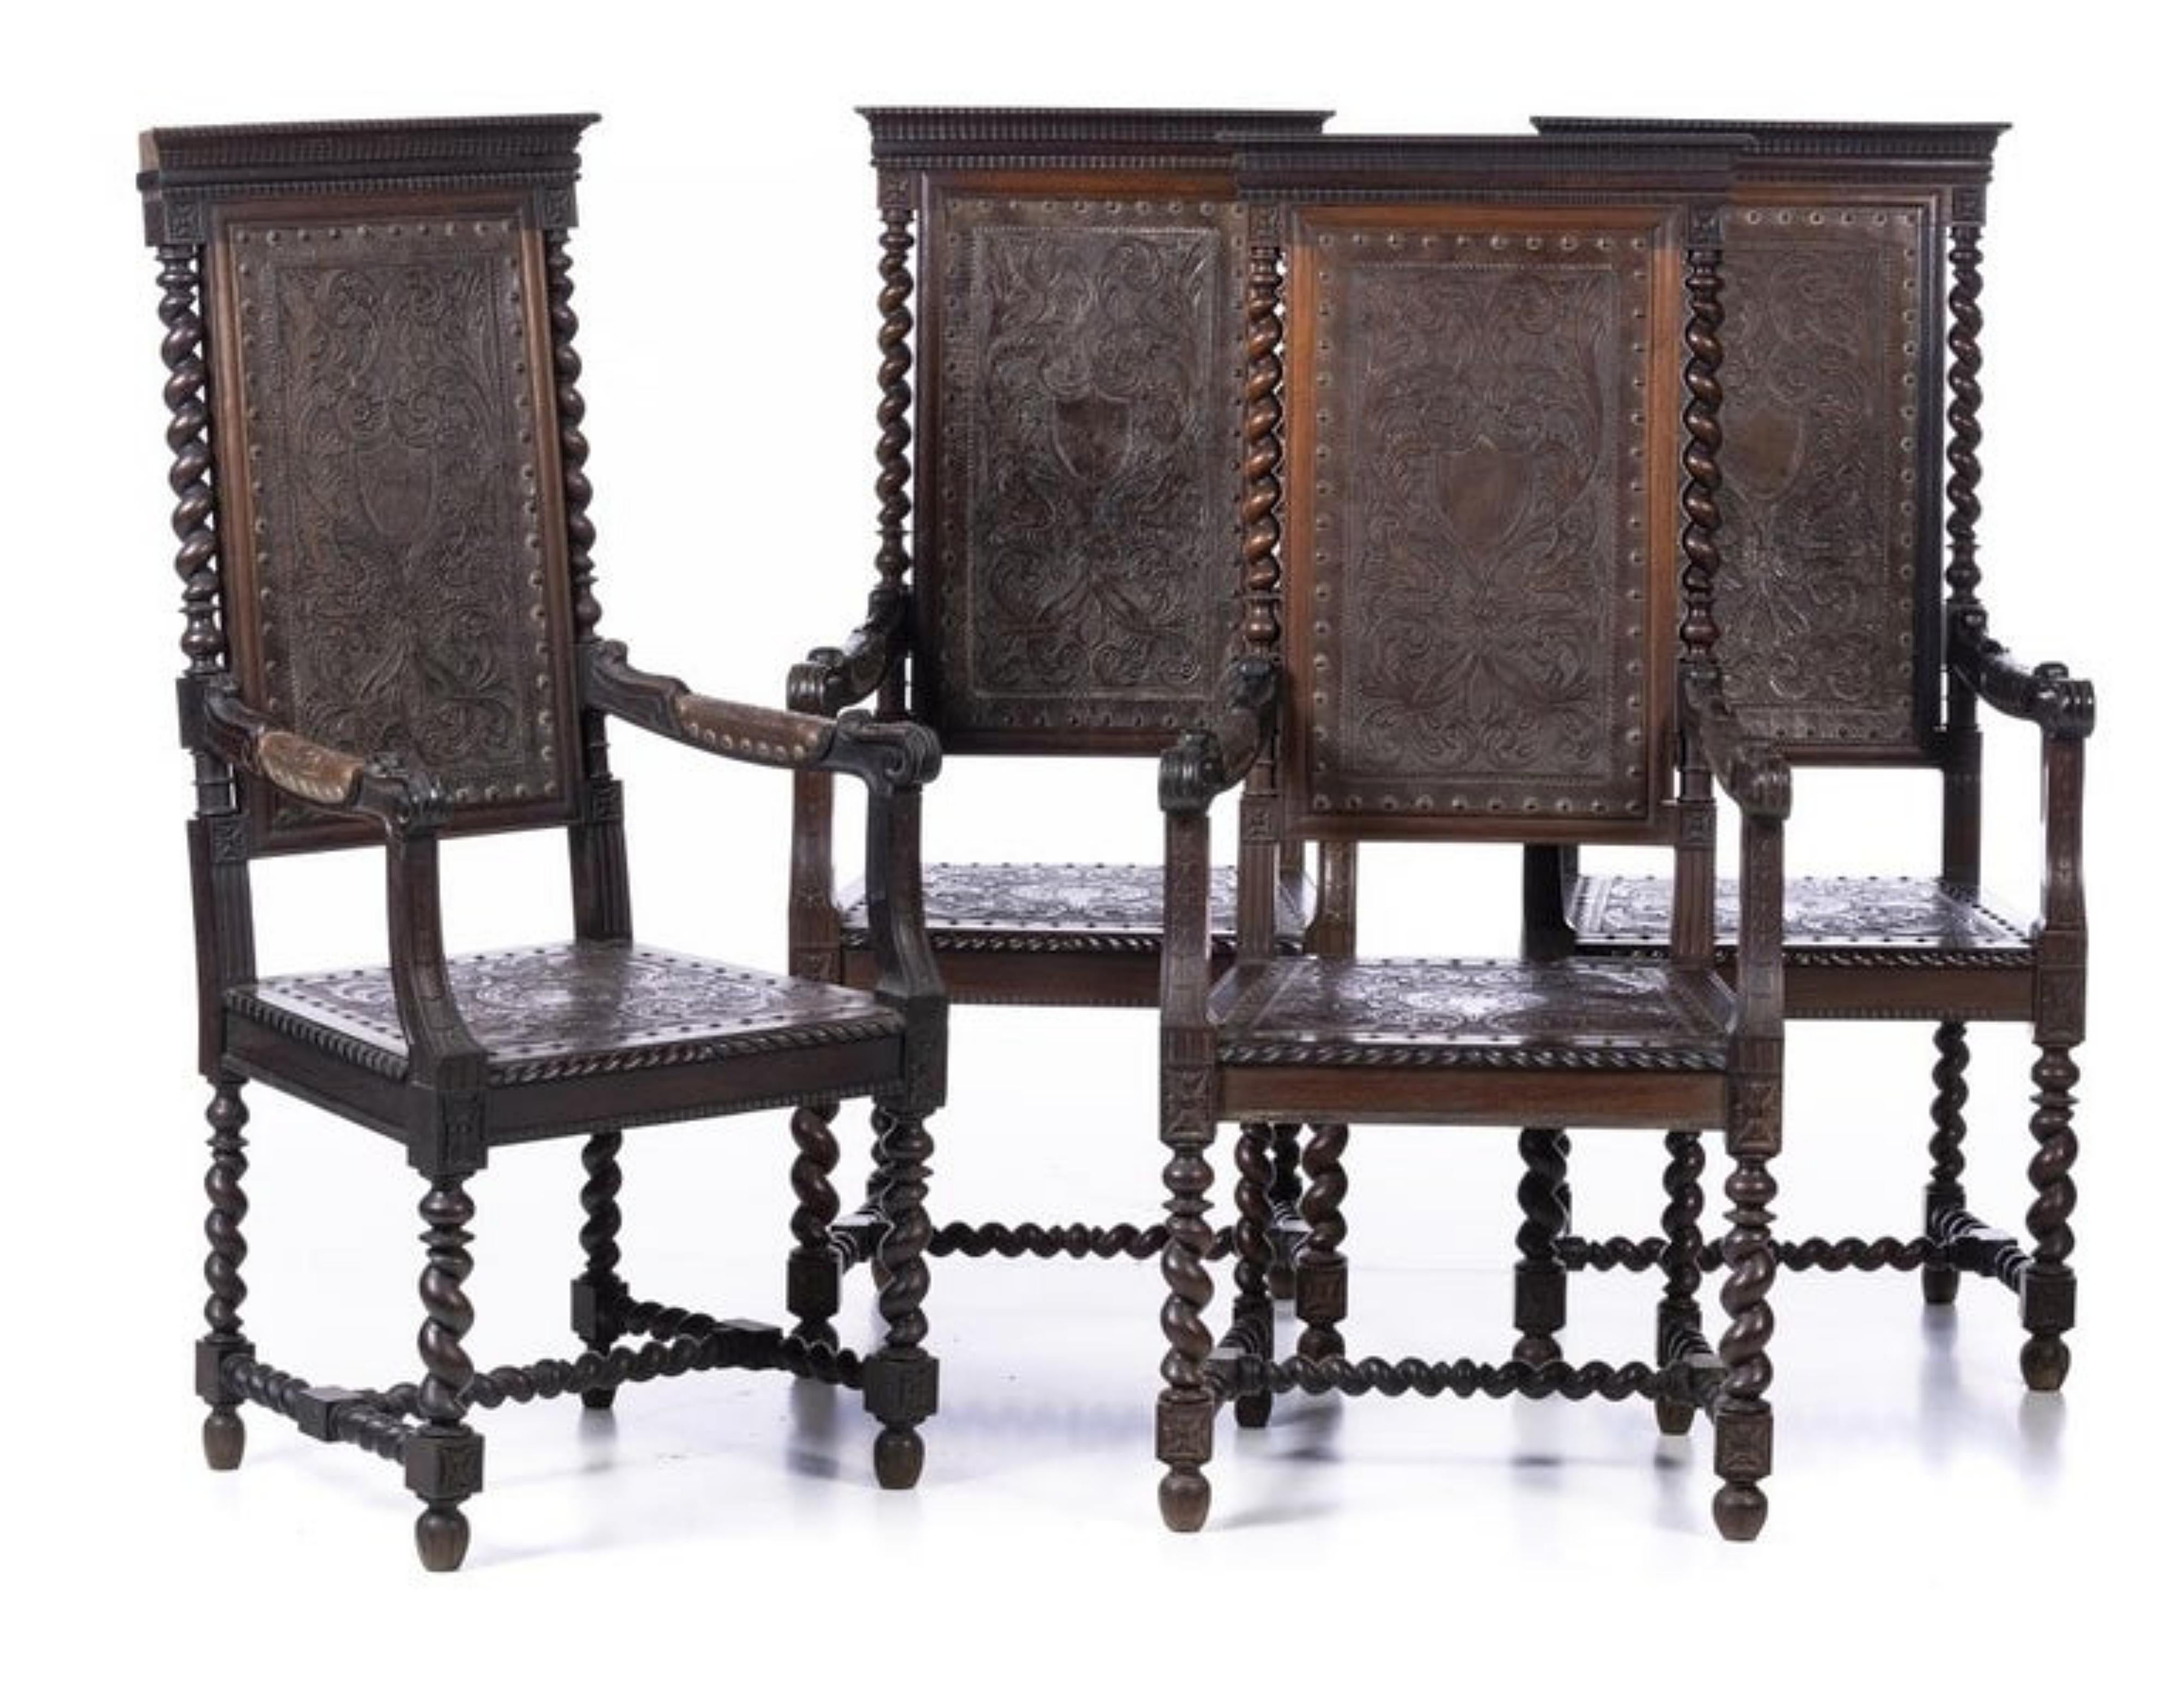 Hand-Crafted Set of Four Portuguese Armchairs from the 18th Century For Sale